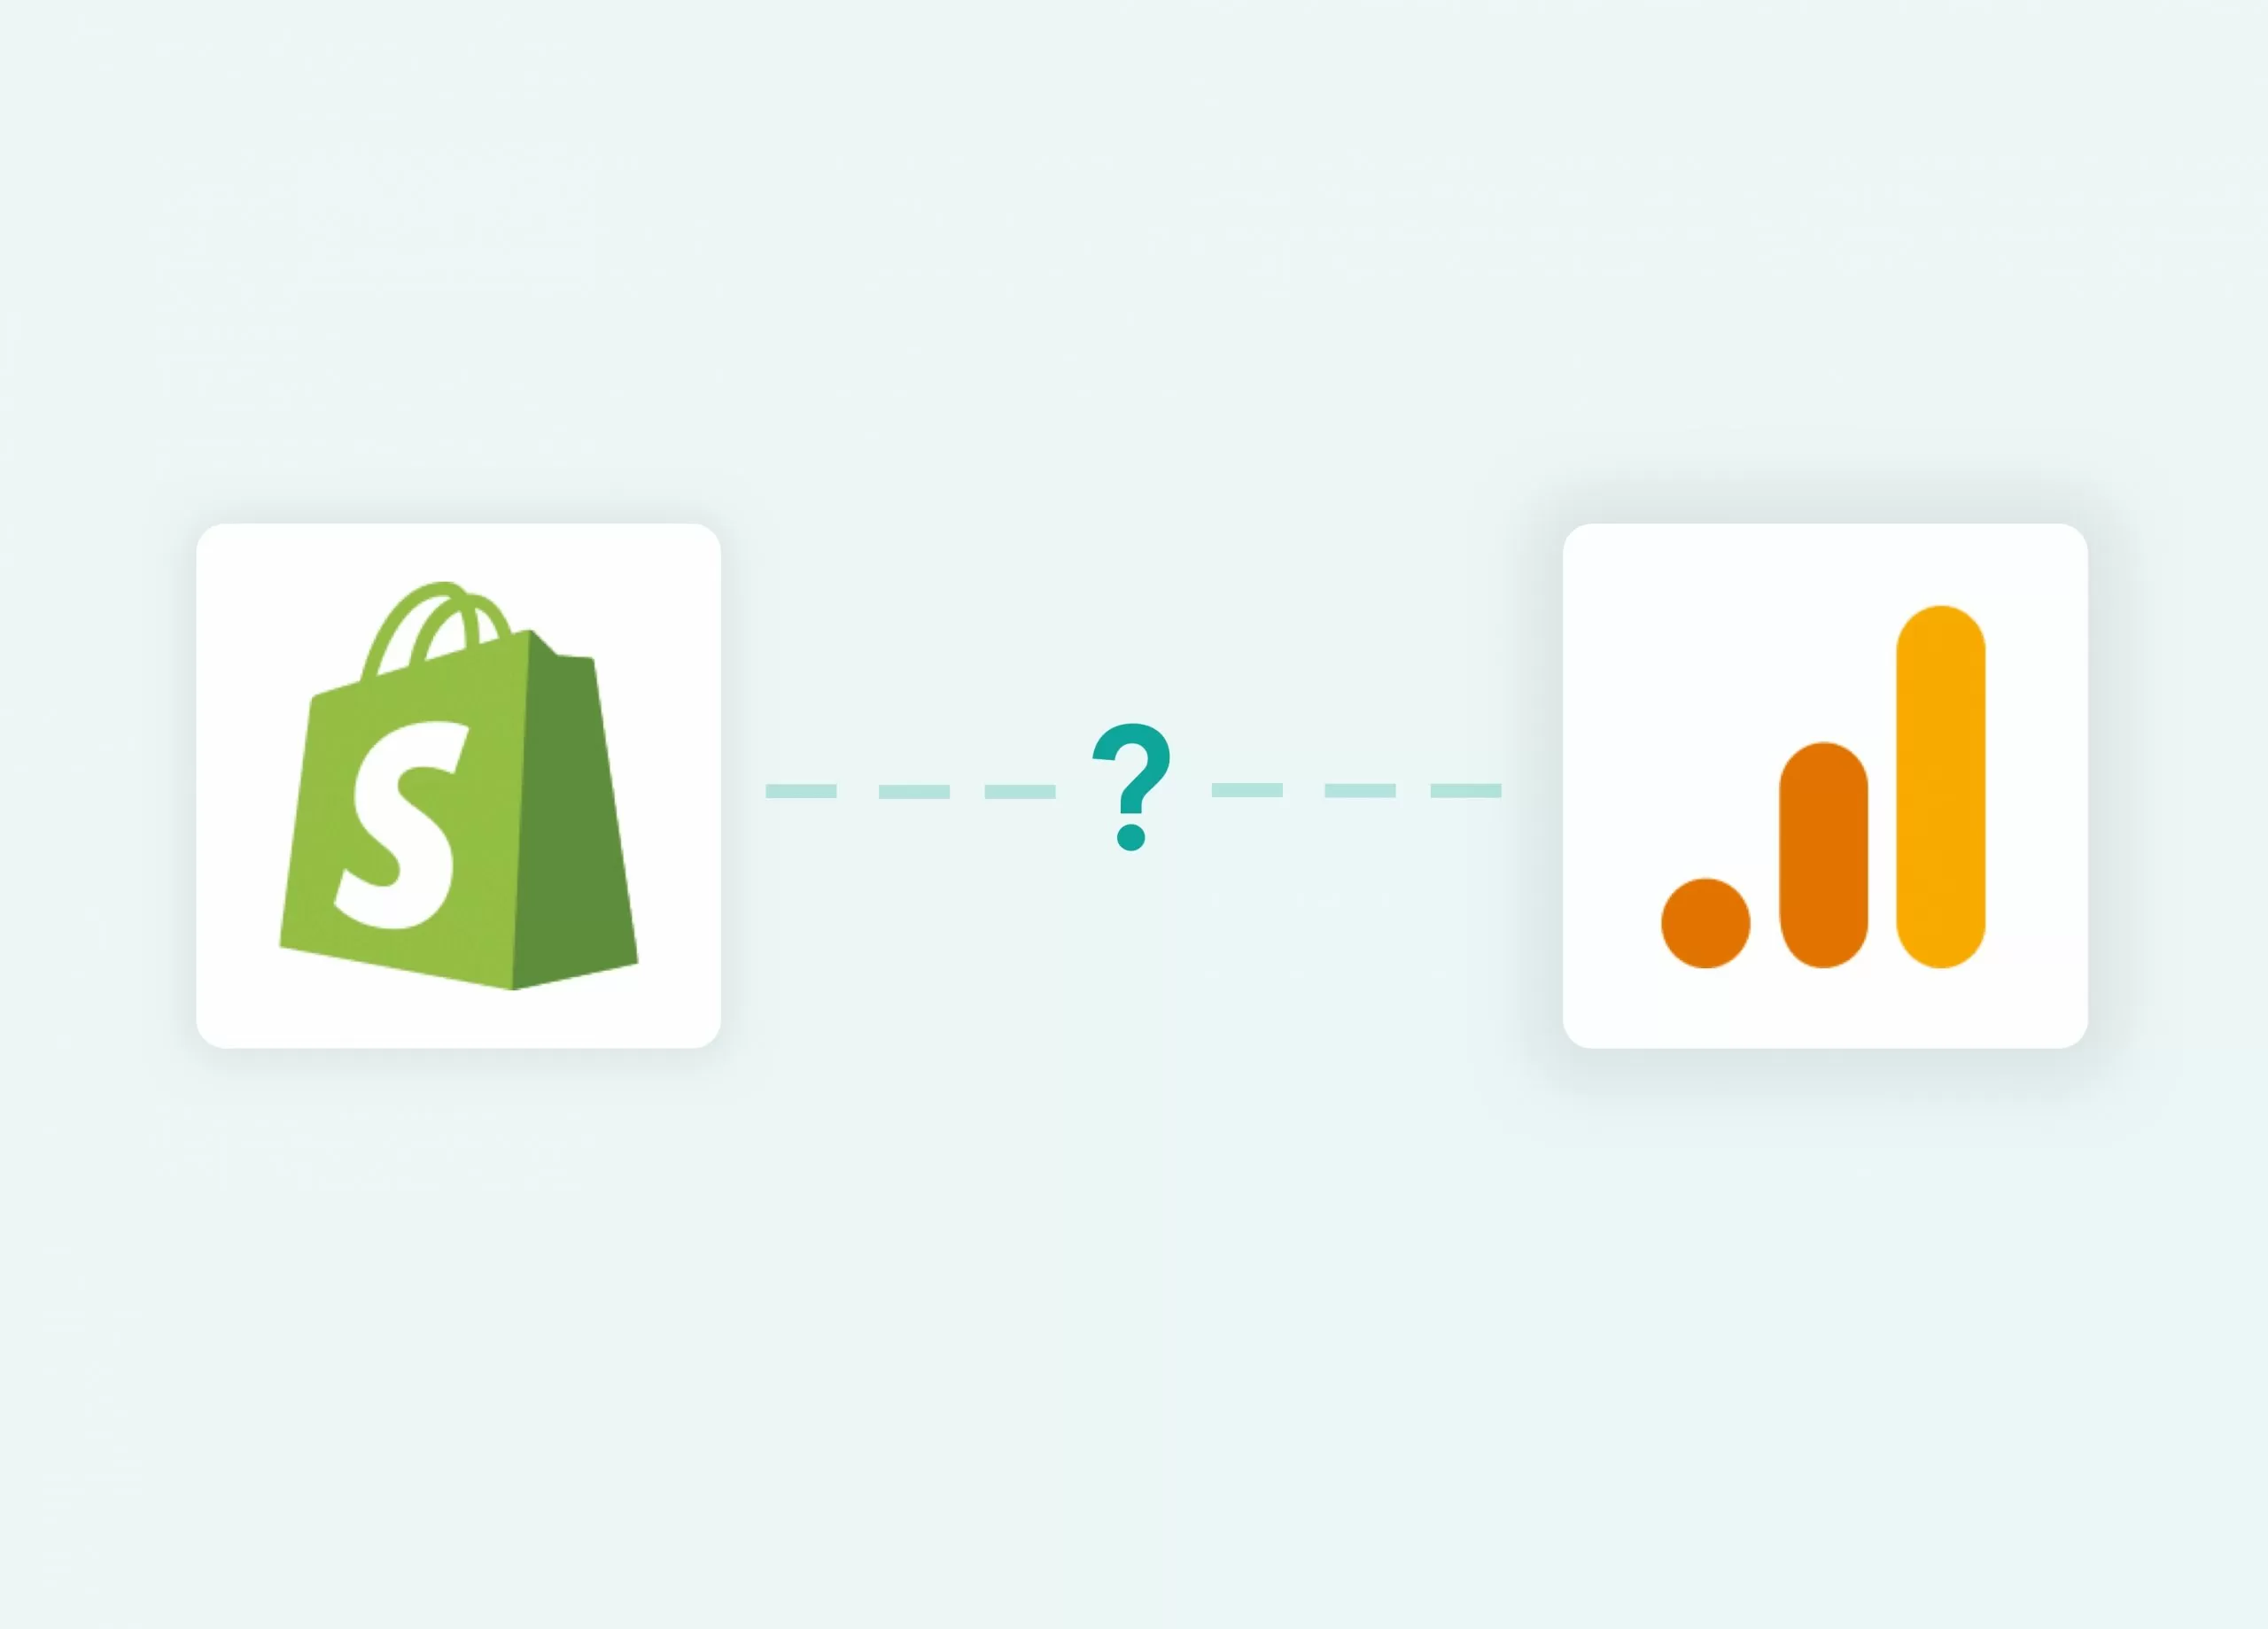 You can easily integrate Google Analytics into your Shopify store to begin tracking and analyzing without any hassle.